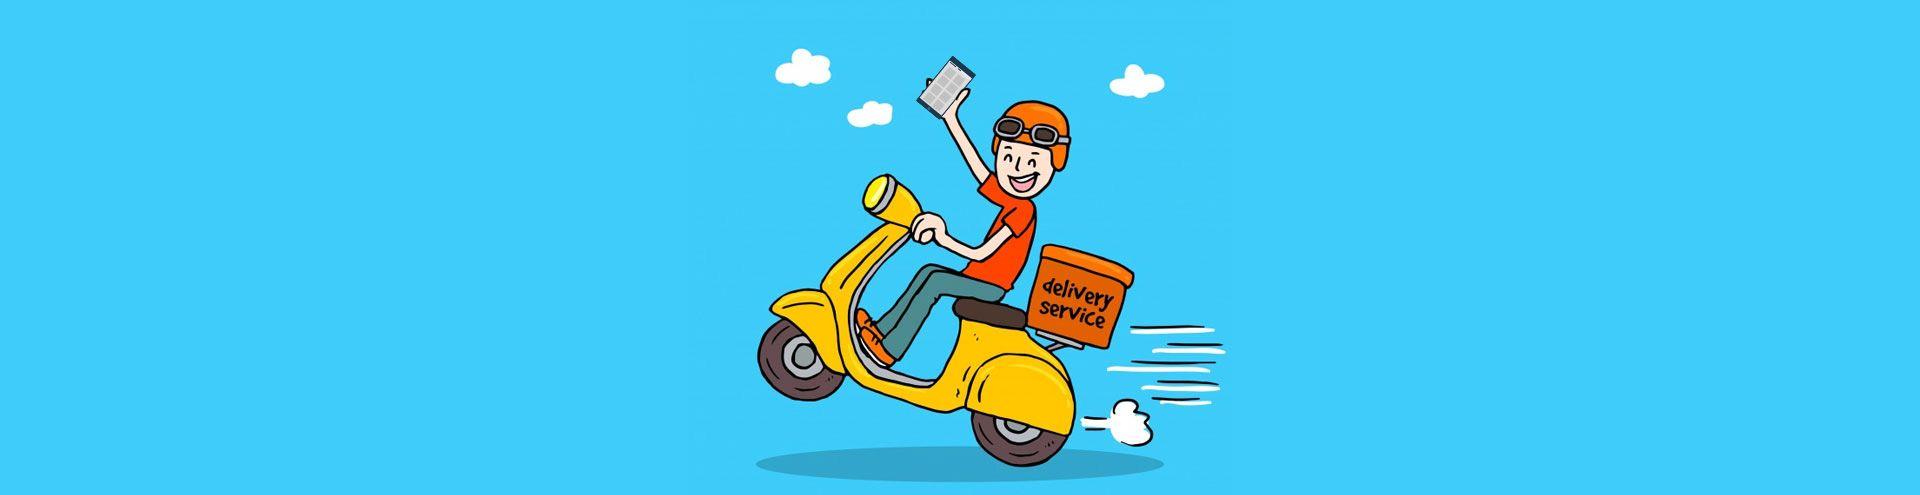 How to Choose a Delivery Service for Your Marketplace: Tips and Reviews